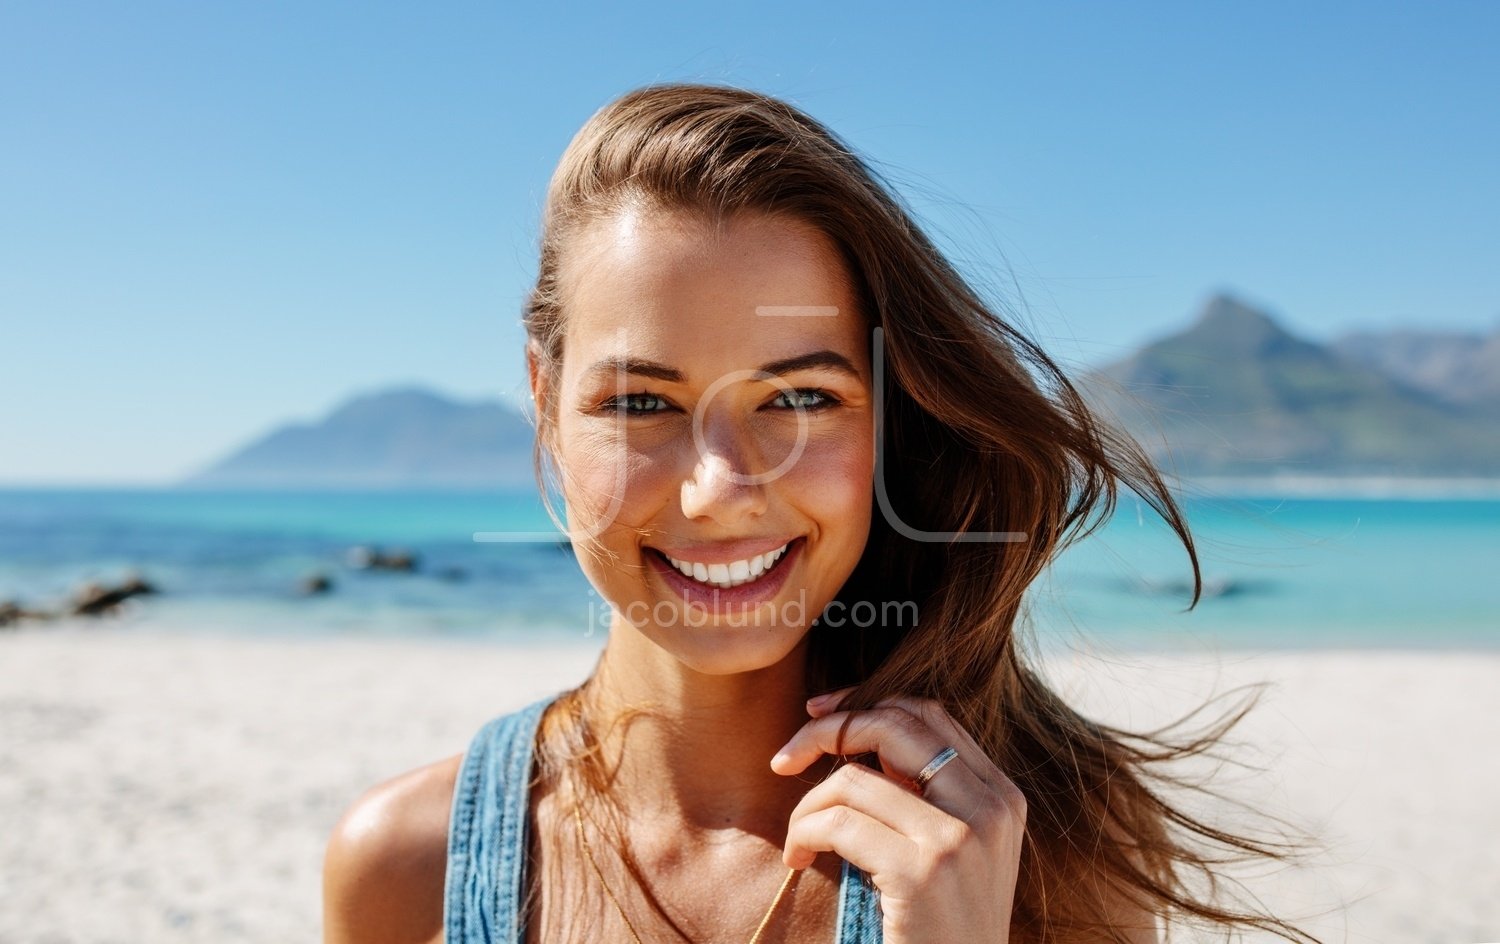 Beautiful young woman on the beach – Jacob Lund Photography Store